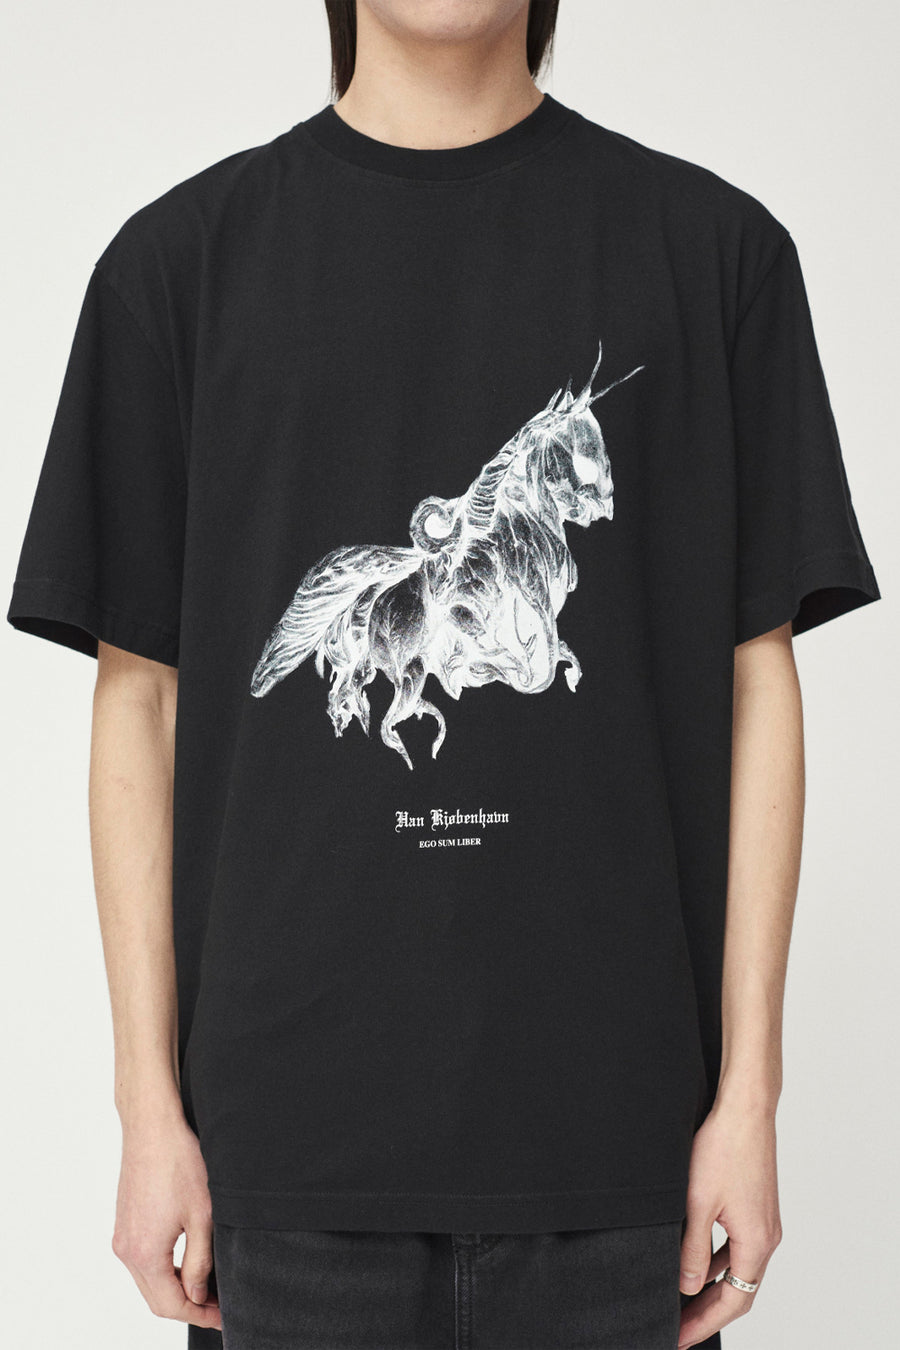 Buy the Han Kjobenhavn Unicorn boxy T-Shirt in Black at Intro. Spend £50 for free UK delivery. Official stockists. We ship worldwide.